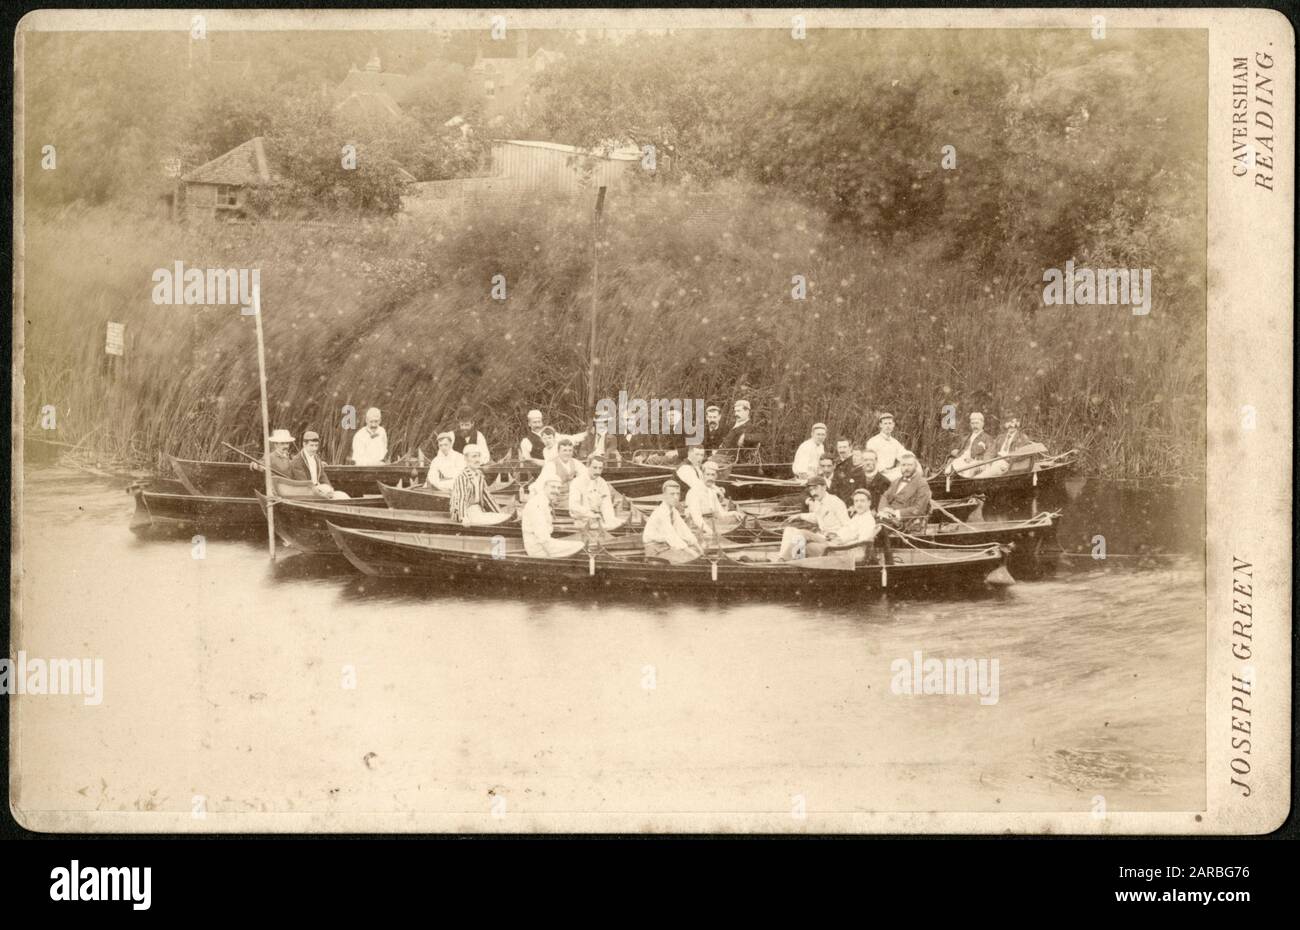 Photograph by Joseph Green, Bridge Street, Caversham, Reading showing a group of jolly chaps having a lot of fun in long rowing boats on the River Thames at Caversham. Stock Photo